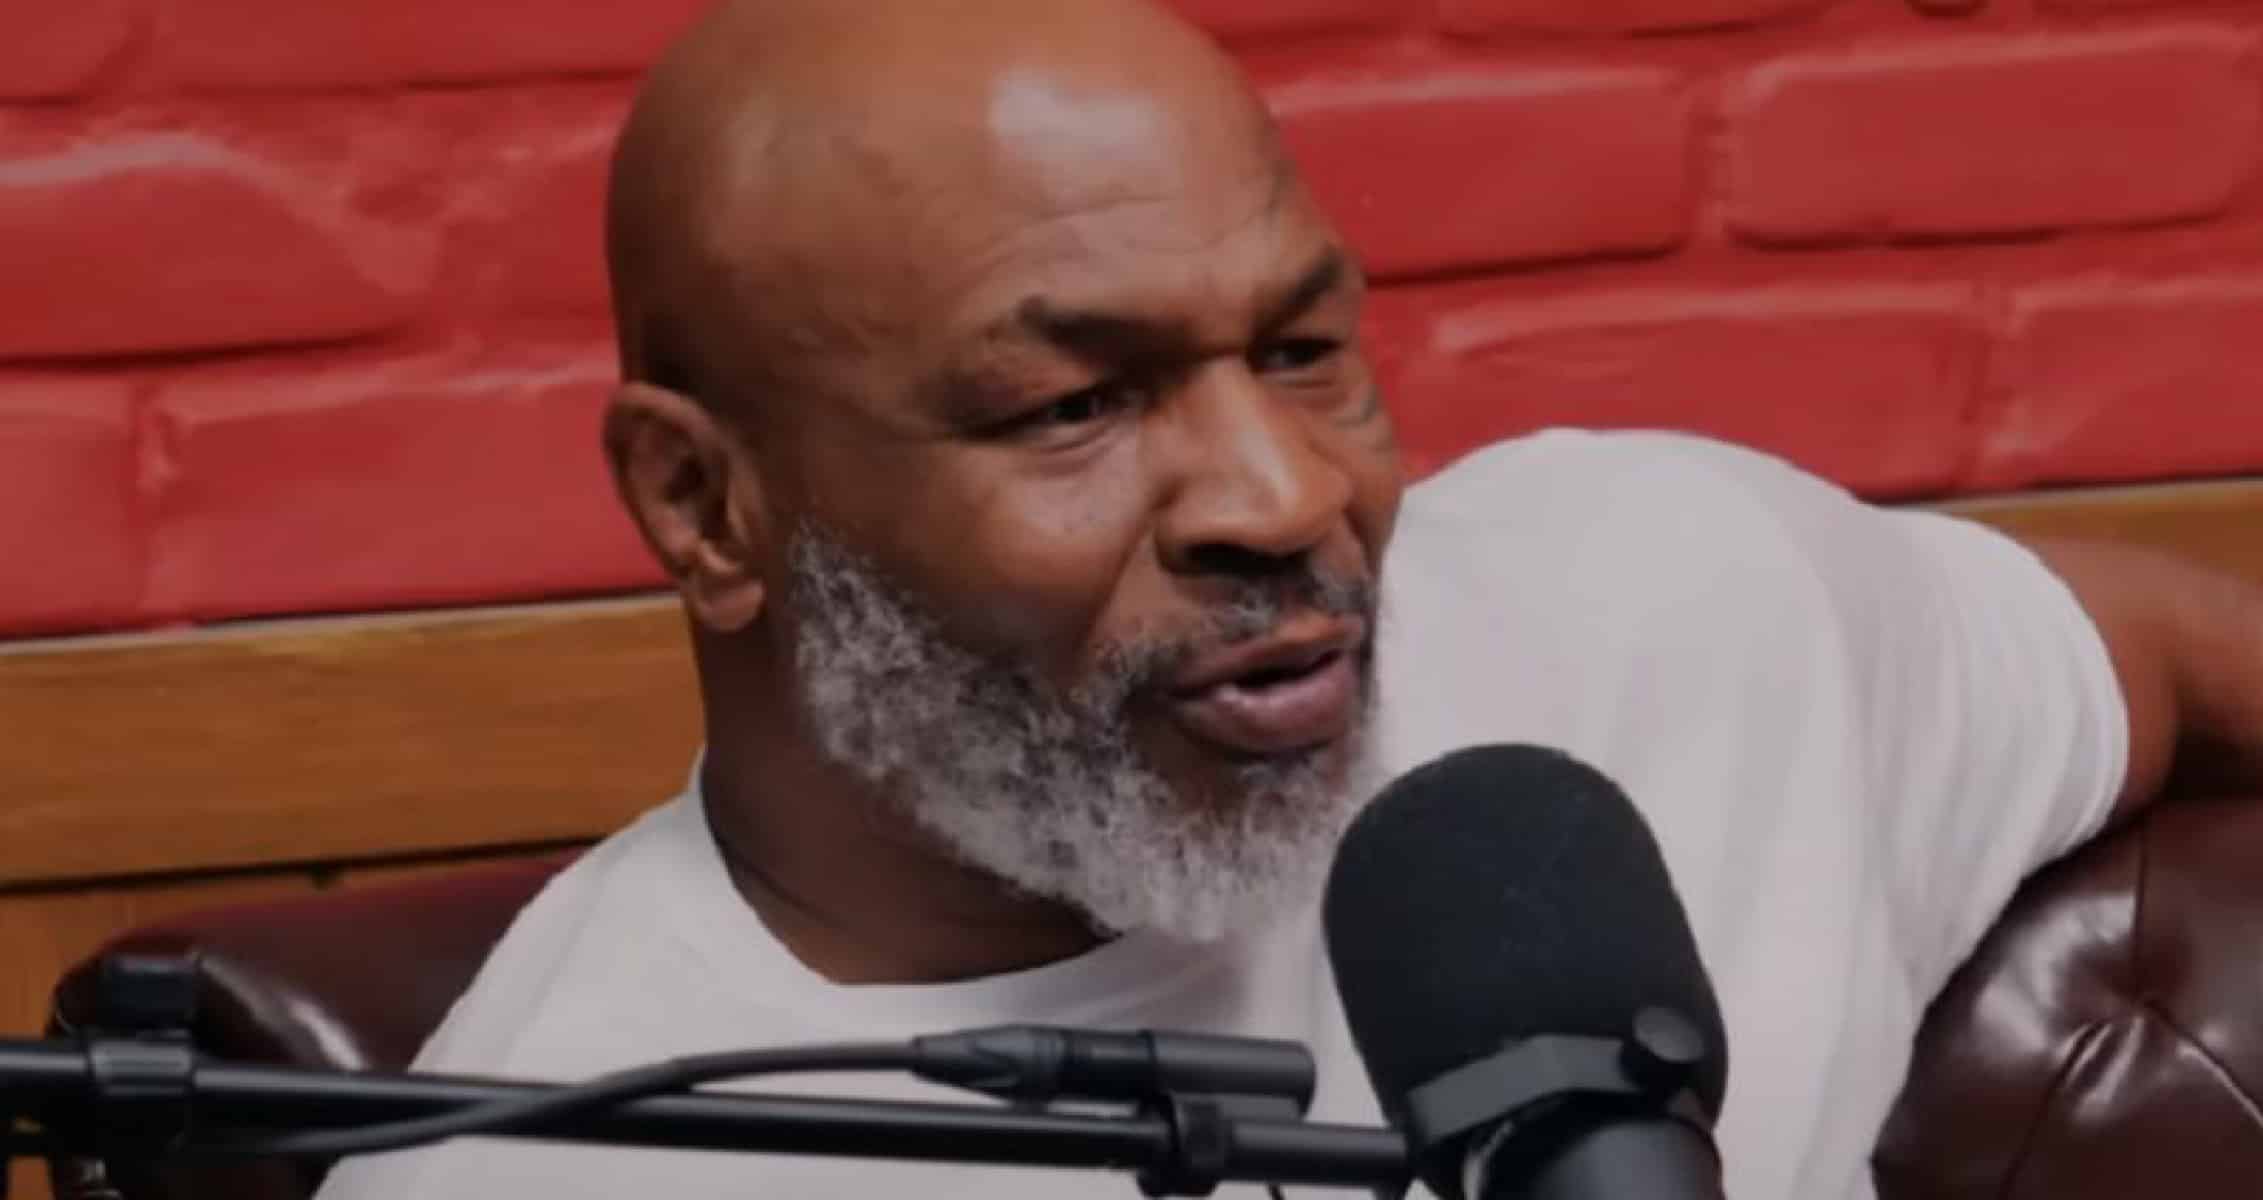 Mike Tyson Reflects on His Mortality: “My Expiration Date is Coming Close Really Soon”